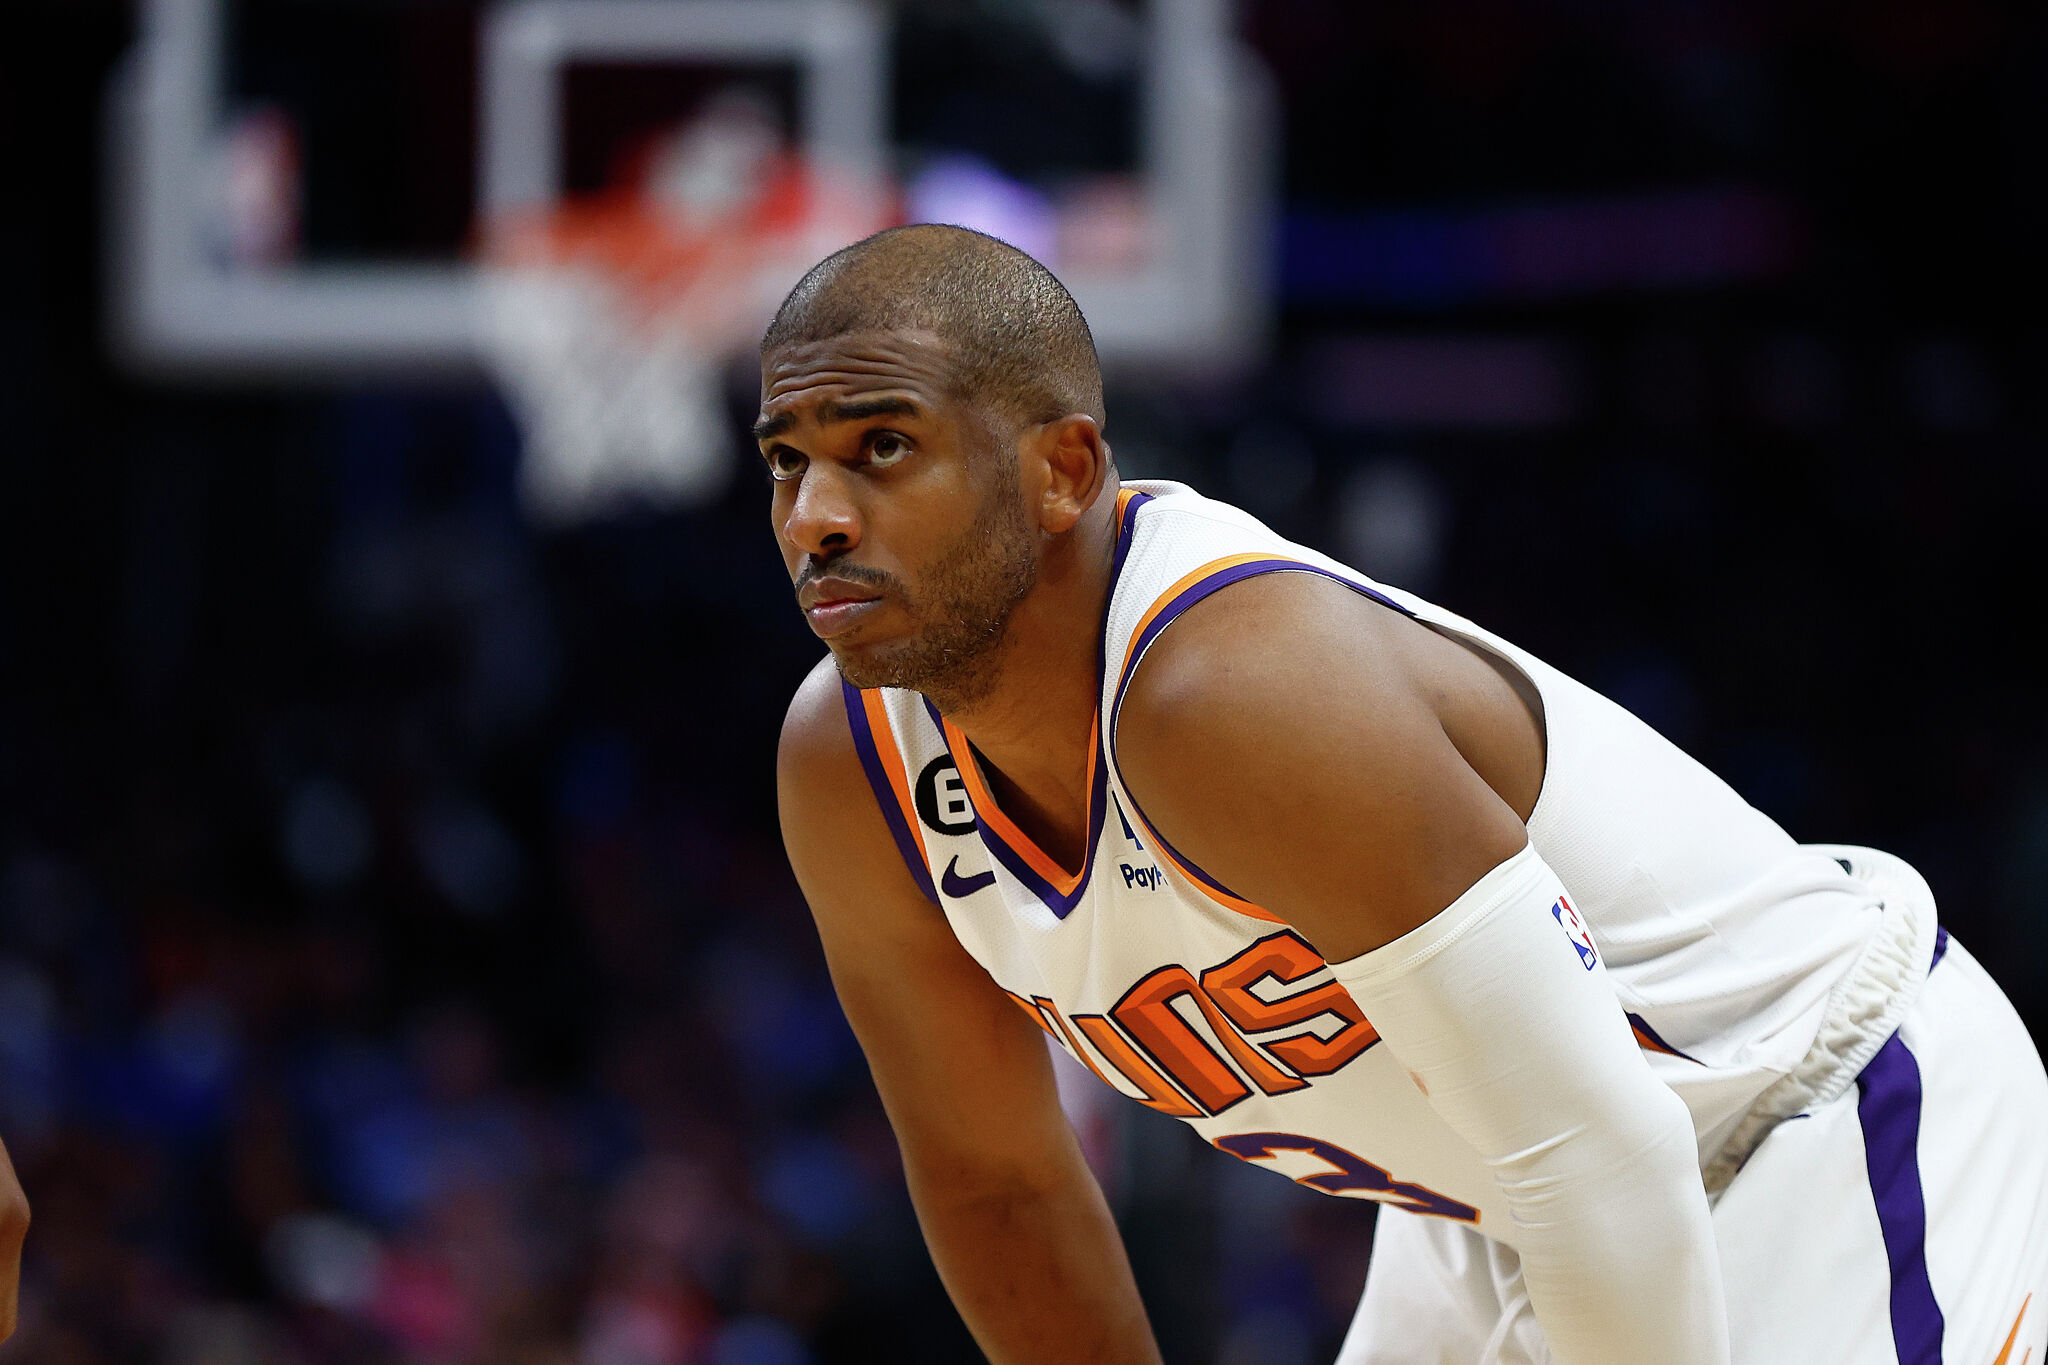 Not Everyone Likes Chris Paul. And He's O.K. With That. - Ruling